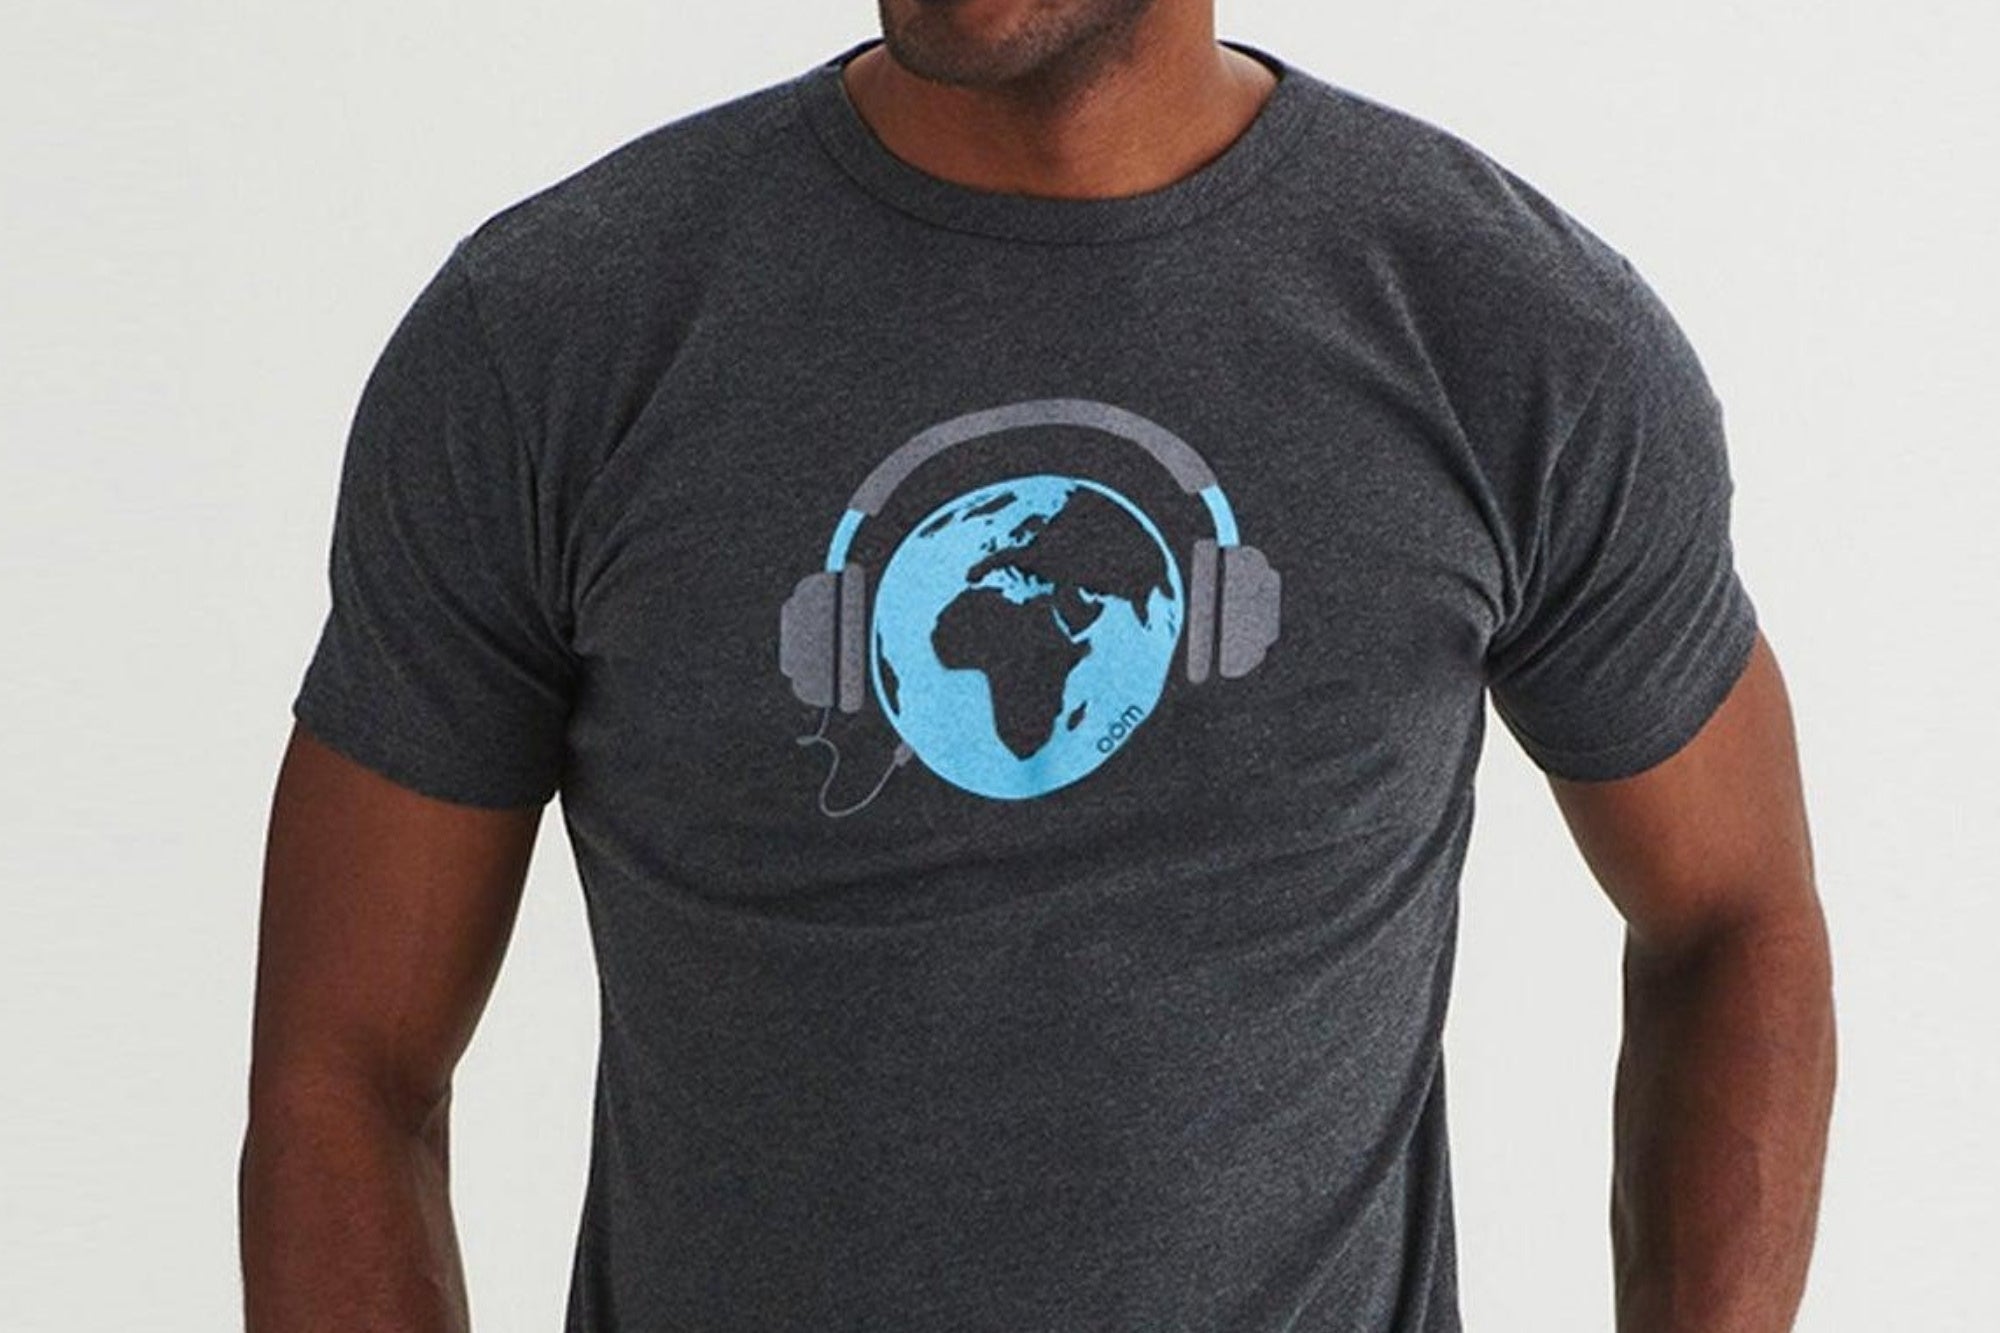 Shop Sustainable Men's Tops at PHITCetera.com | Halifax Sustainable Lifestyle Wear